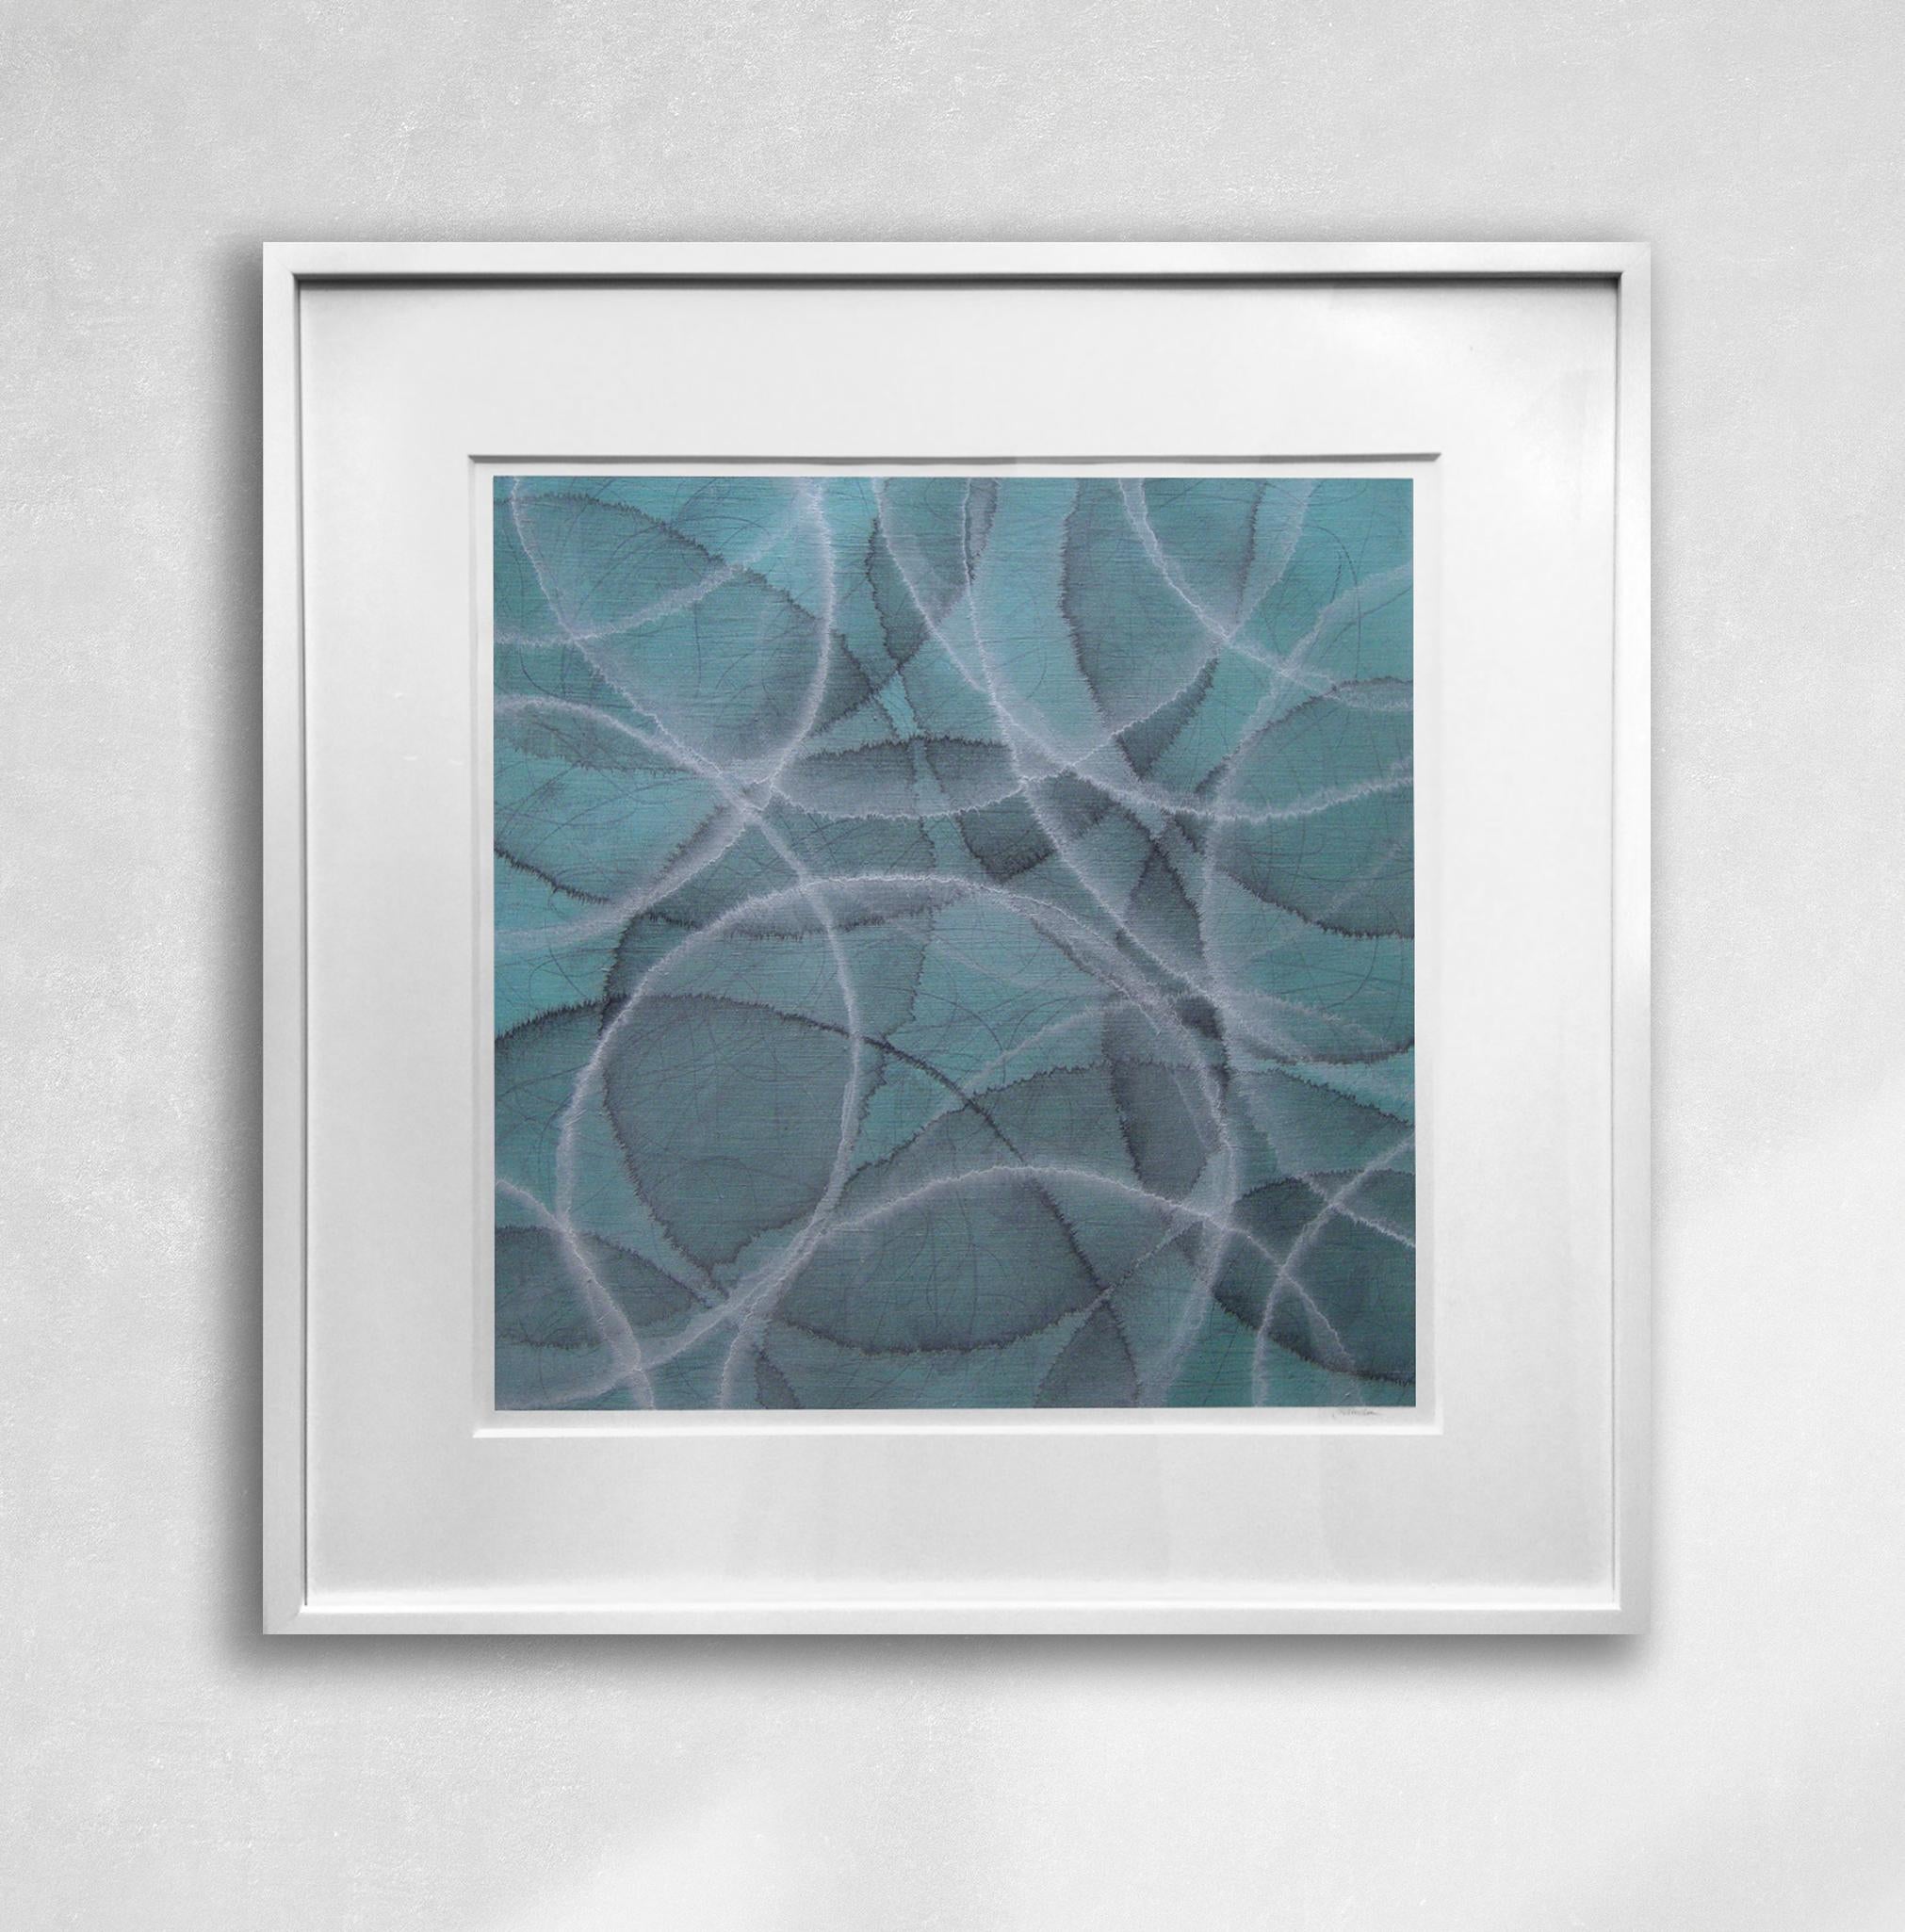 This framed abstract painting by Roger Mudre is made with acrylic paint over metal leaf on paper. It features an overall teal palette, with layers of circle shapes with light and dark outlines over top of one another. The painting is 20" x 20" (30"